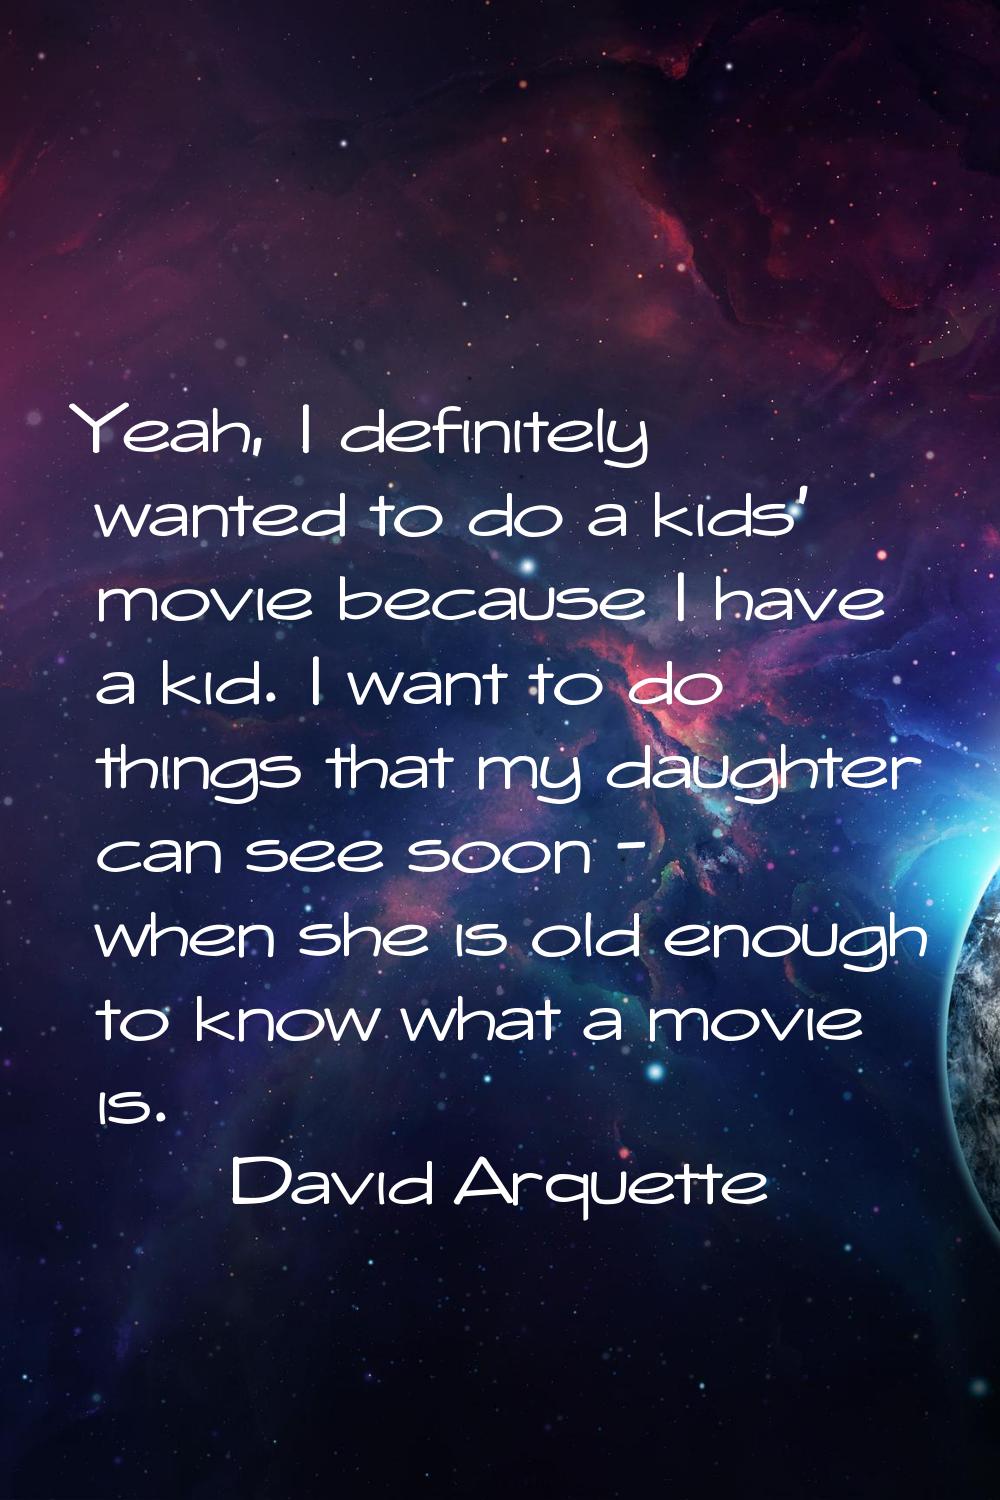 Yeah, I definitely wanted to do a kids' movie because I have a kid. I want to do things that my dau